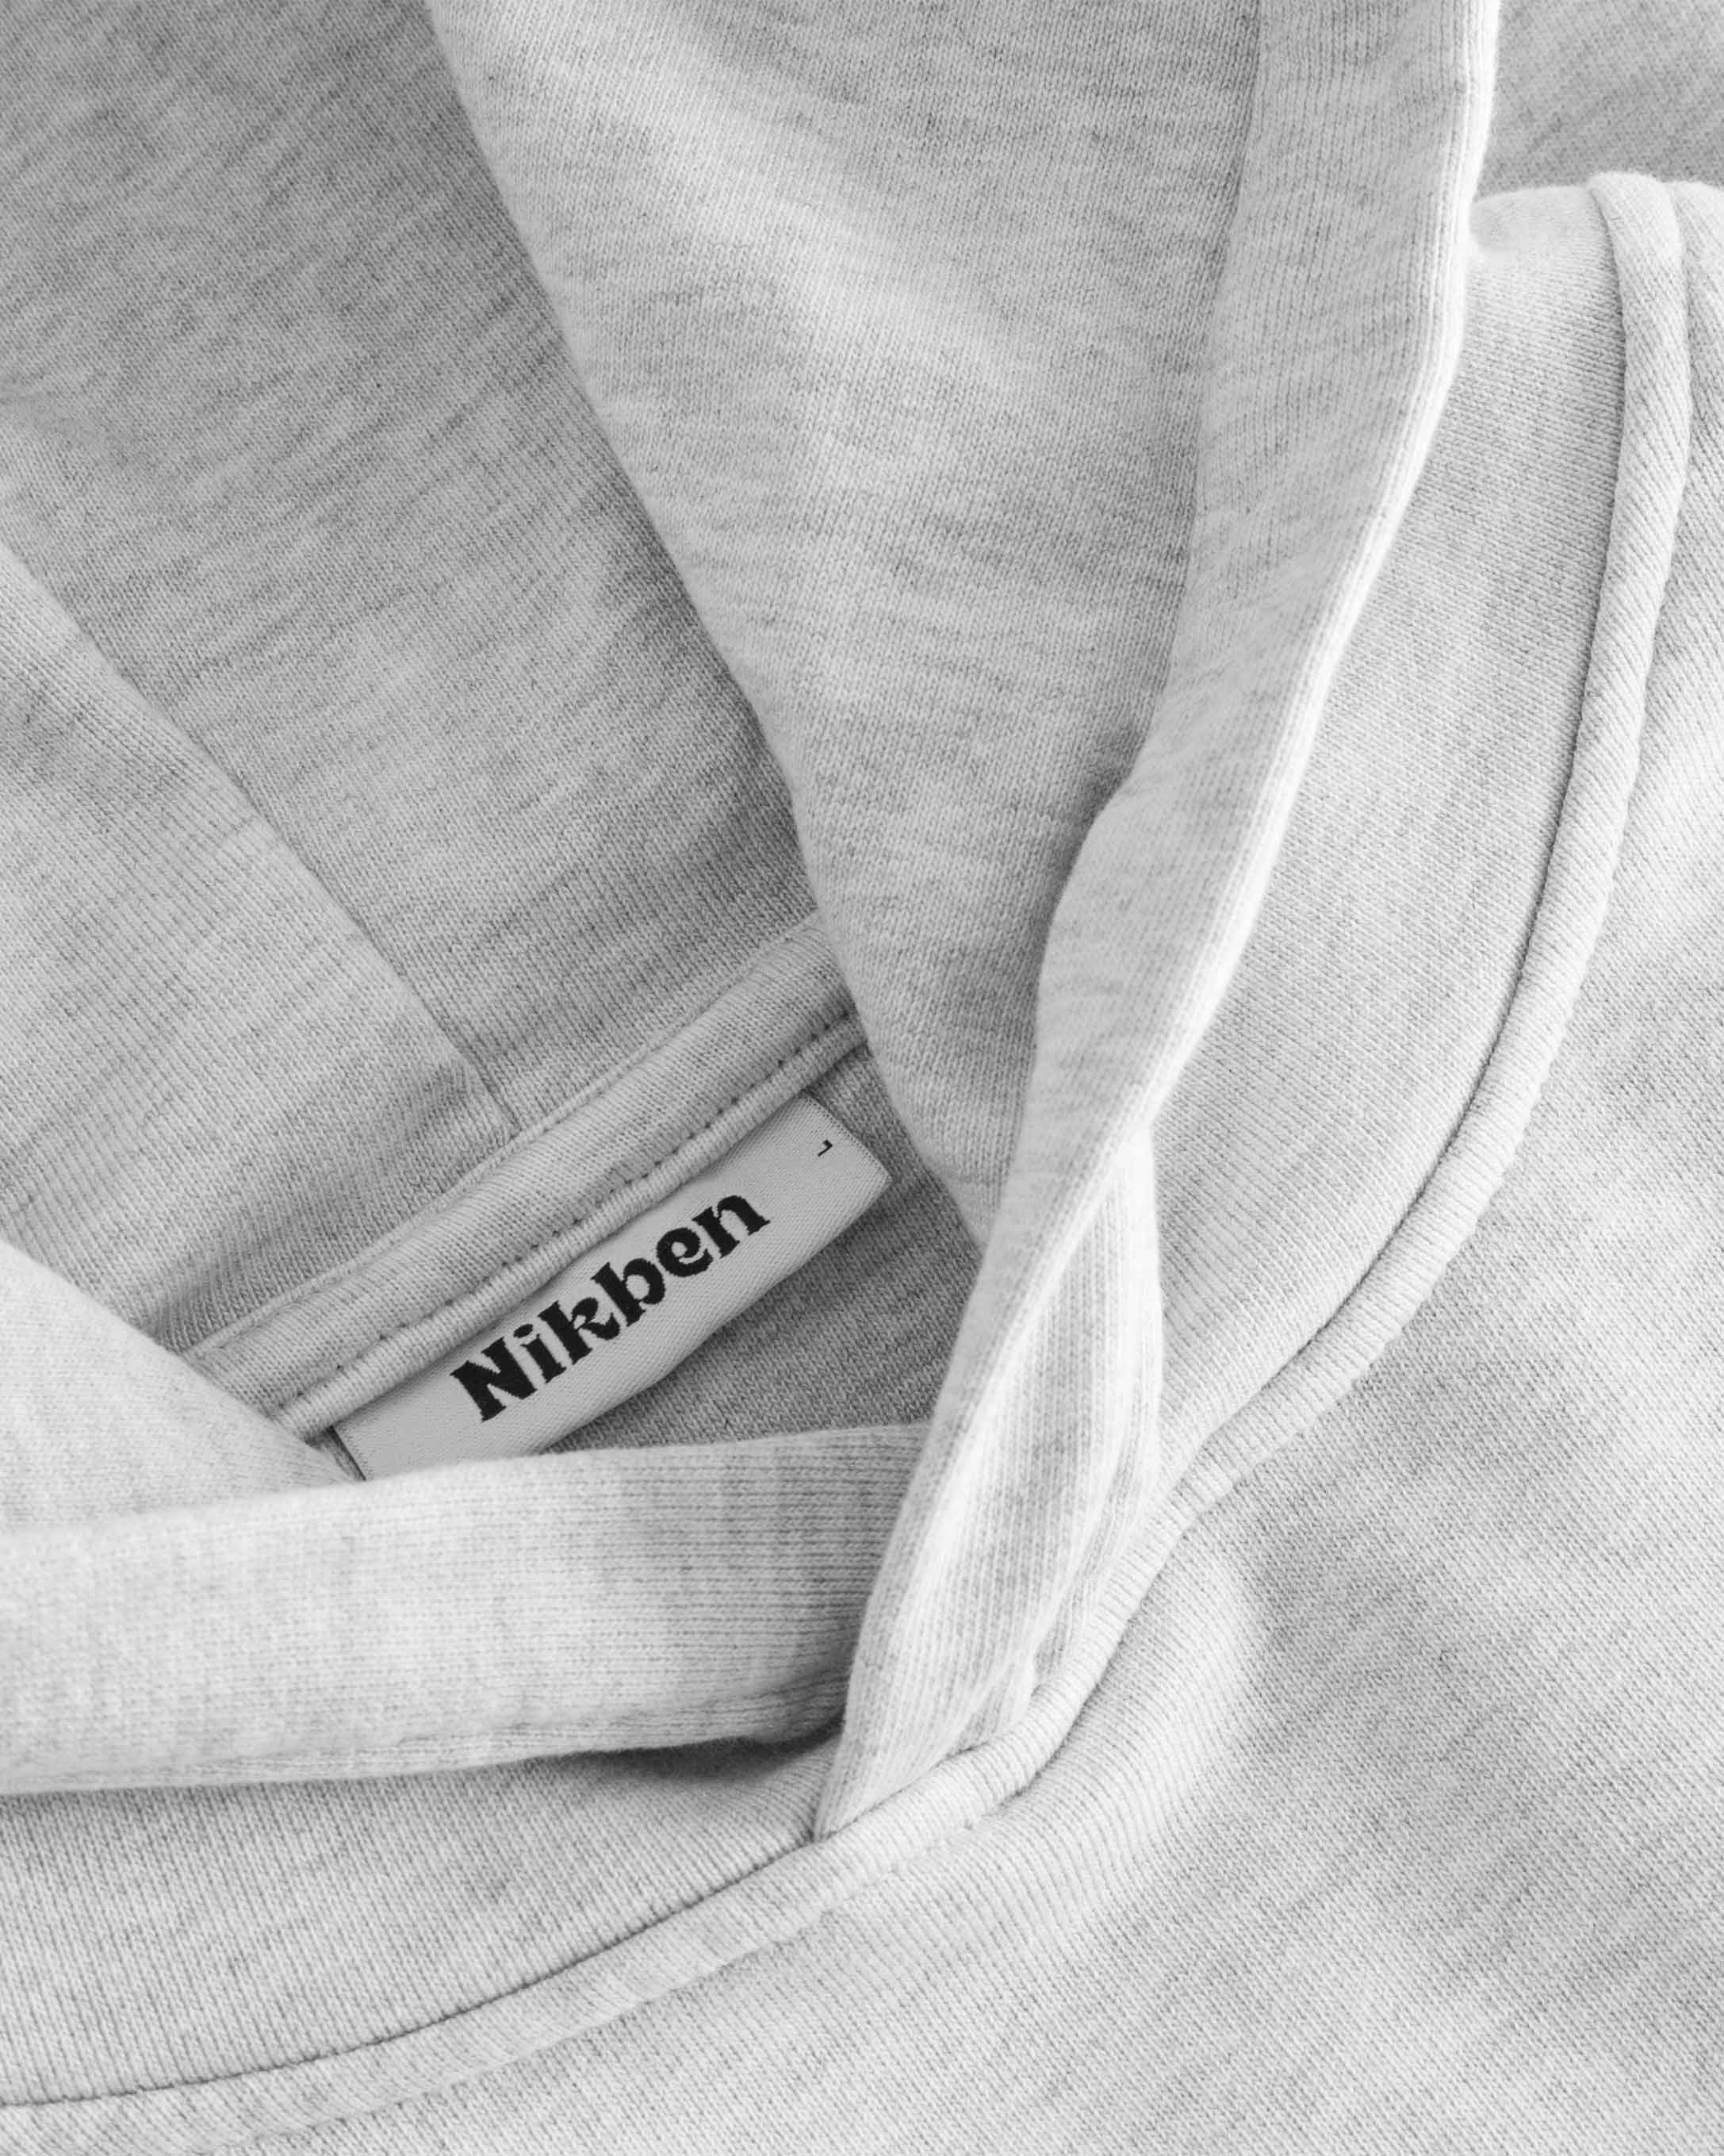 Close-up of stitchings on a grey hoodie.